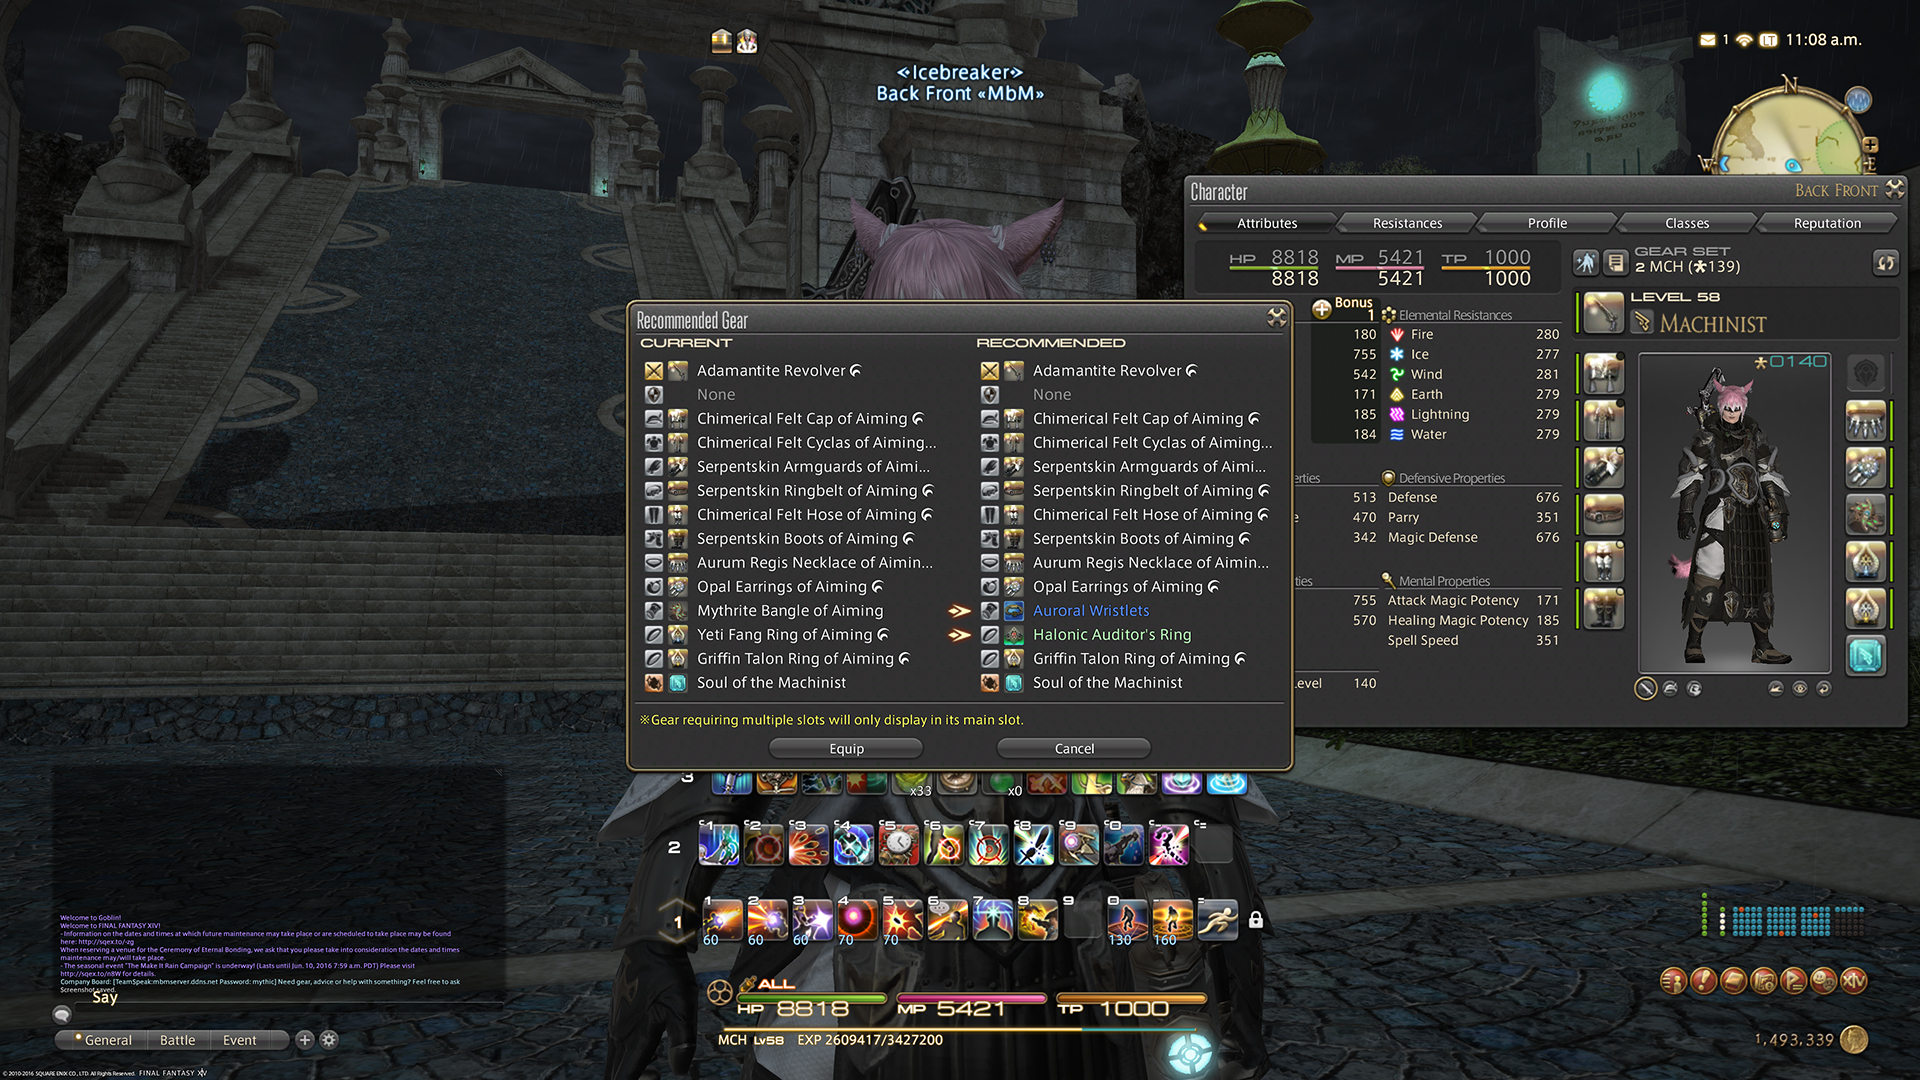 Final Fantasy XIV Finally Gets An Optimise Equipment Button, And It’s Great